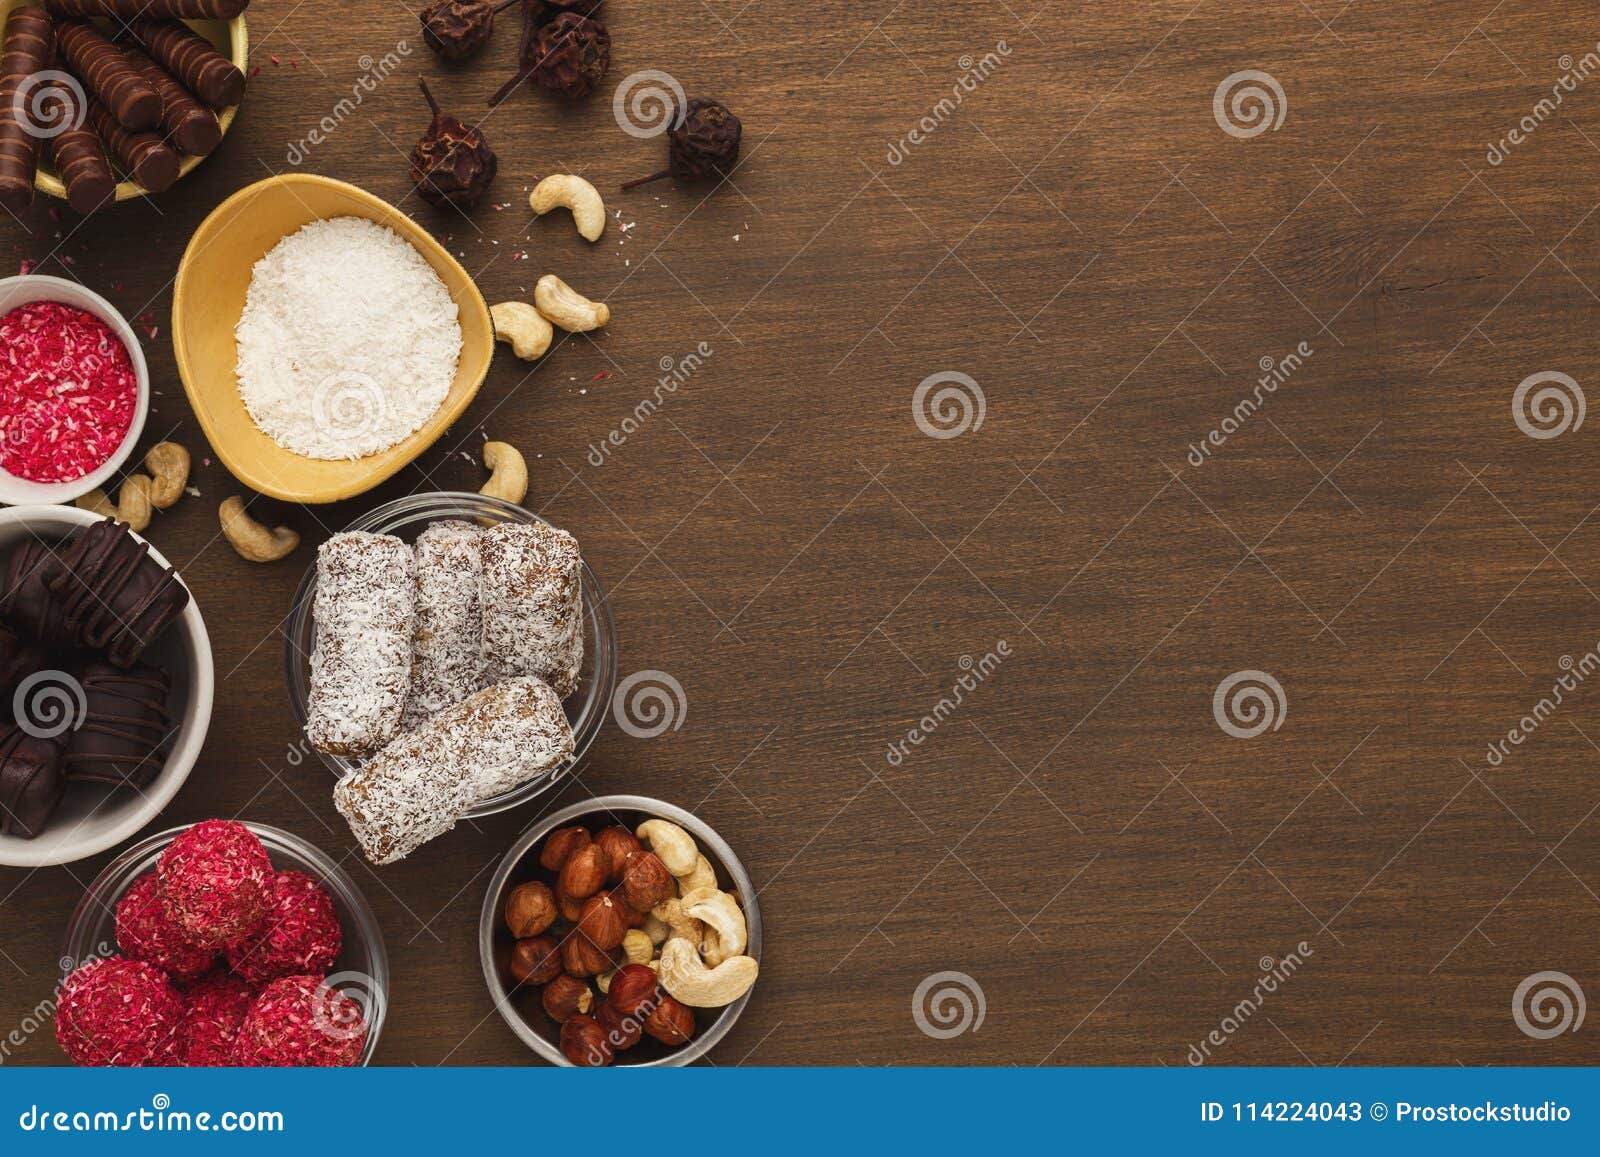 Wooden Desktop With Assortment Of Healthy Sweets And Nuts Stock